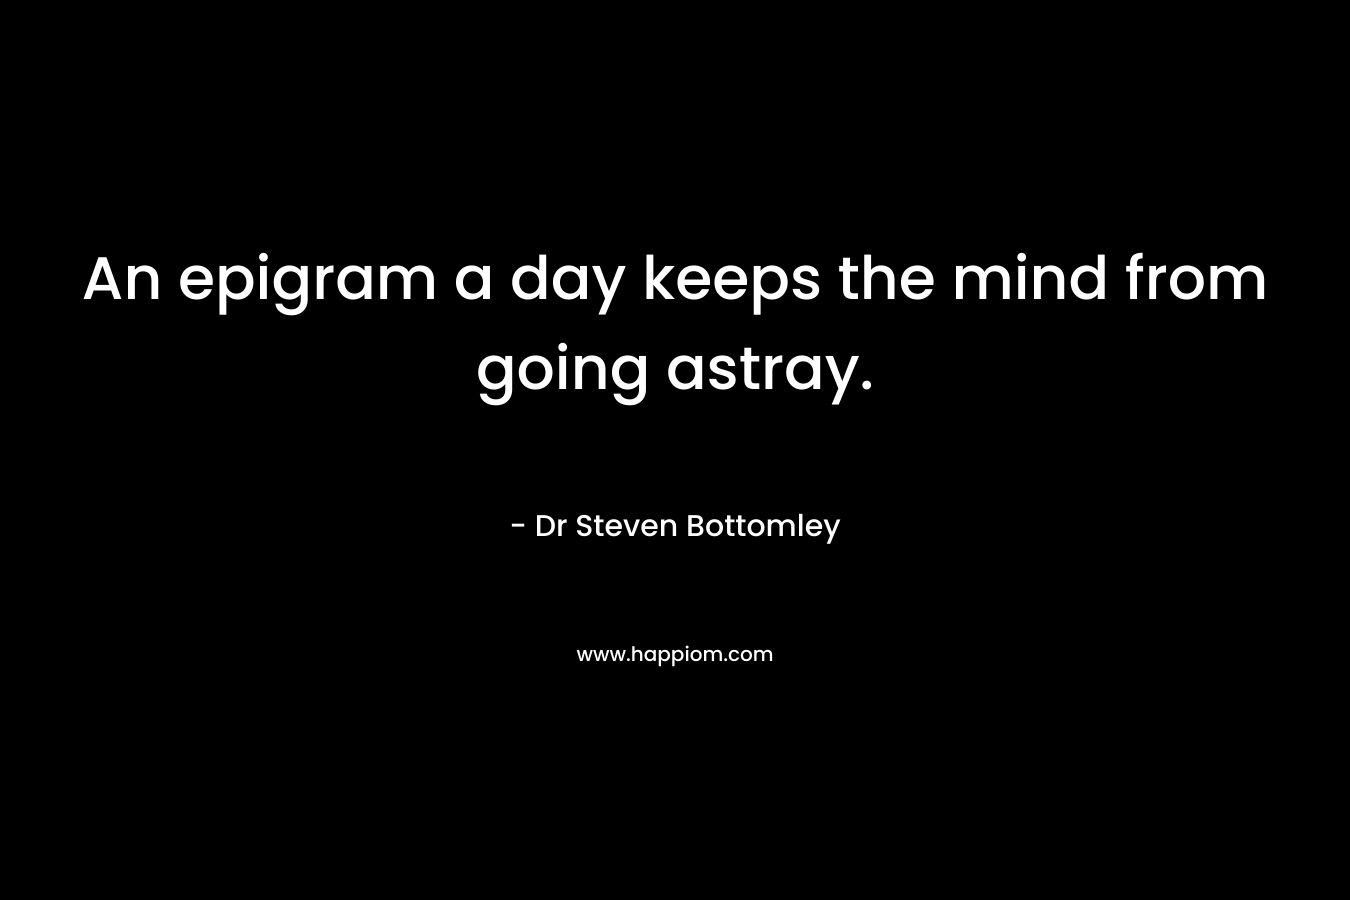 An epigram a day keeps the mind from going astray. – Dr Steven Bottomley